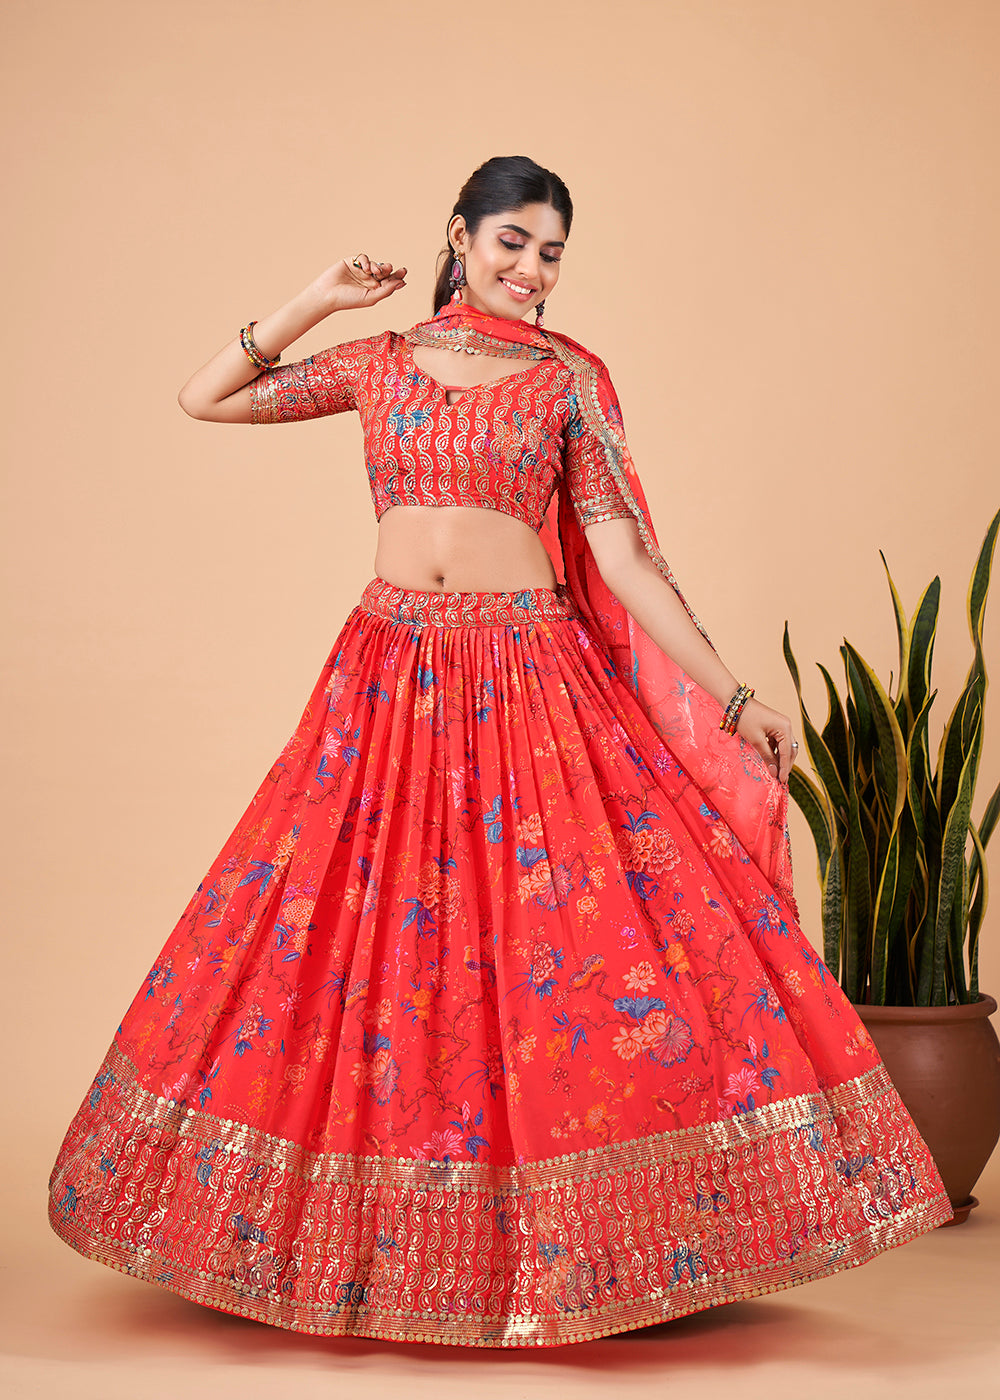 Buy Now Captivating Bright Red Floral Printed Georgette Lehenga Choli Online in USA, UK, Canada & Worldwide at Empress Clothing. 